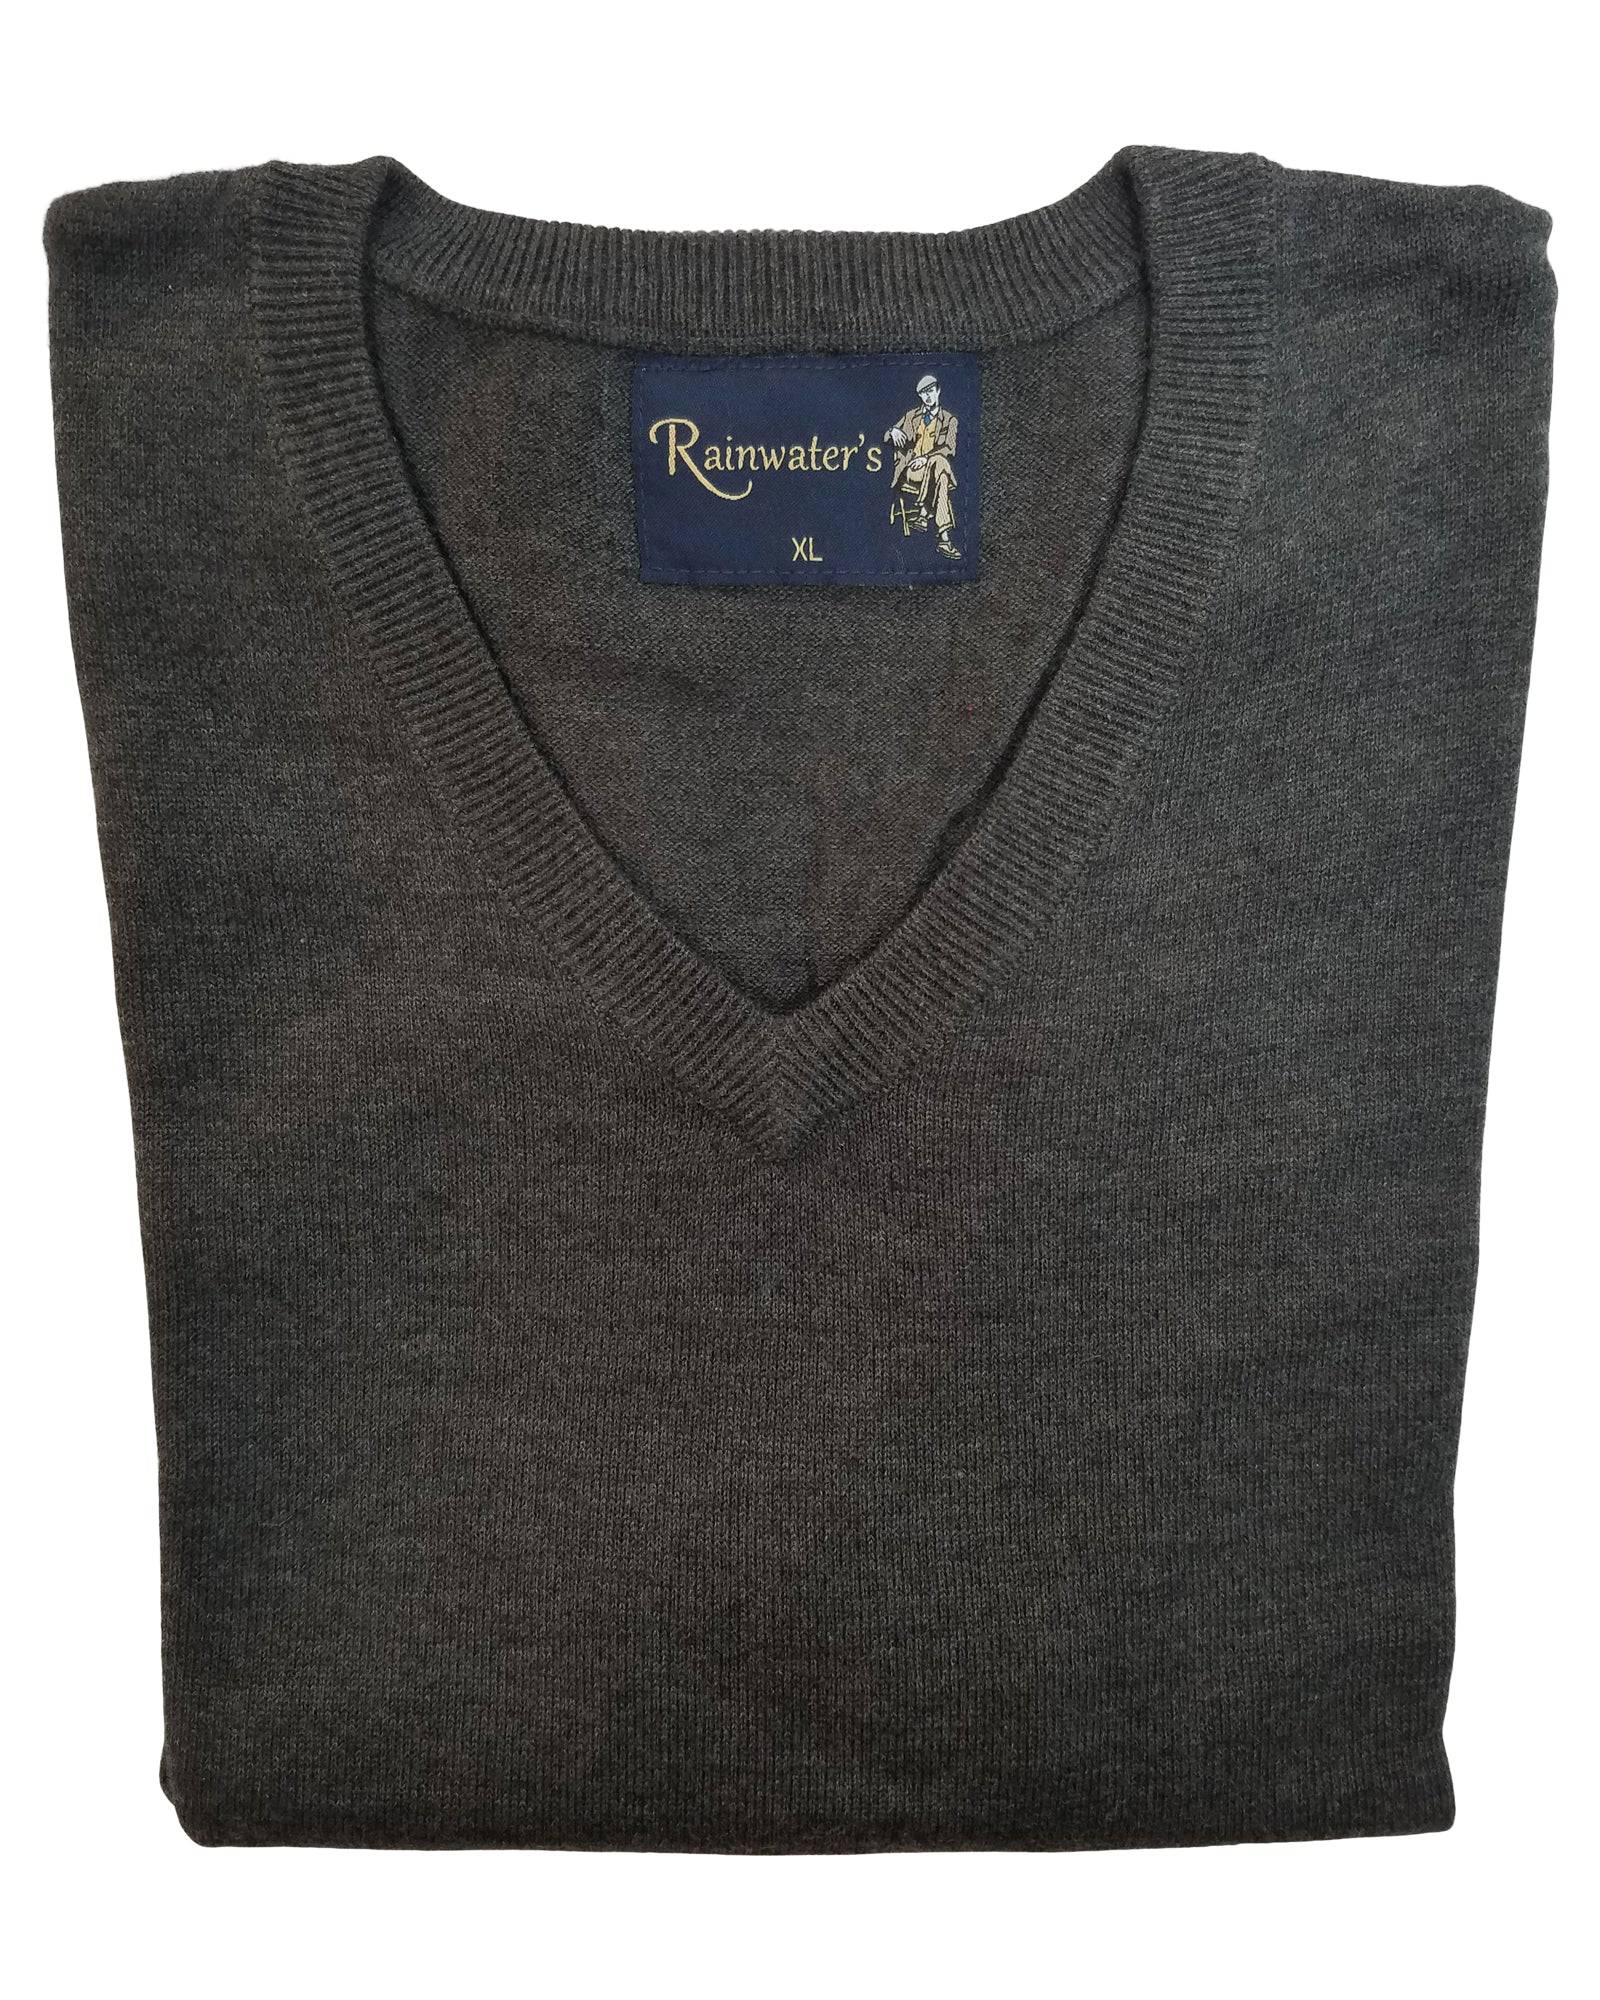 V-Neck Sweater Vest Cotton Blend in Charcoal - Rainwater's Men's Clothing and Tuxedo Rental